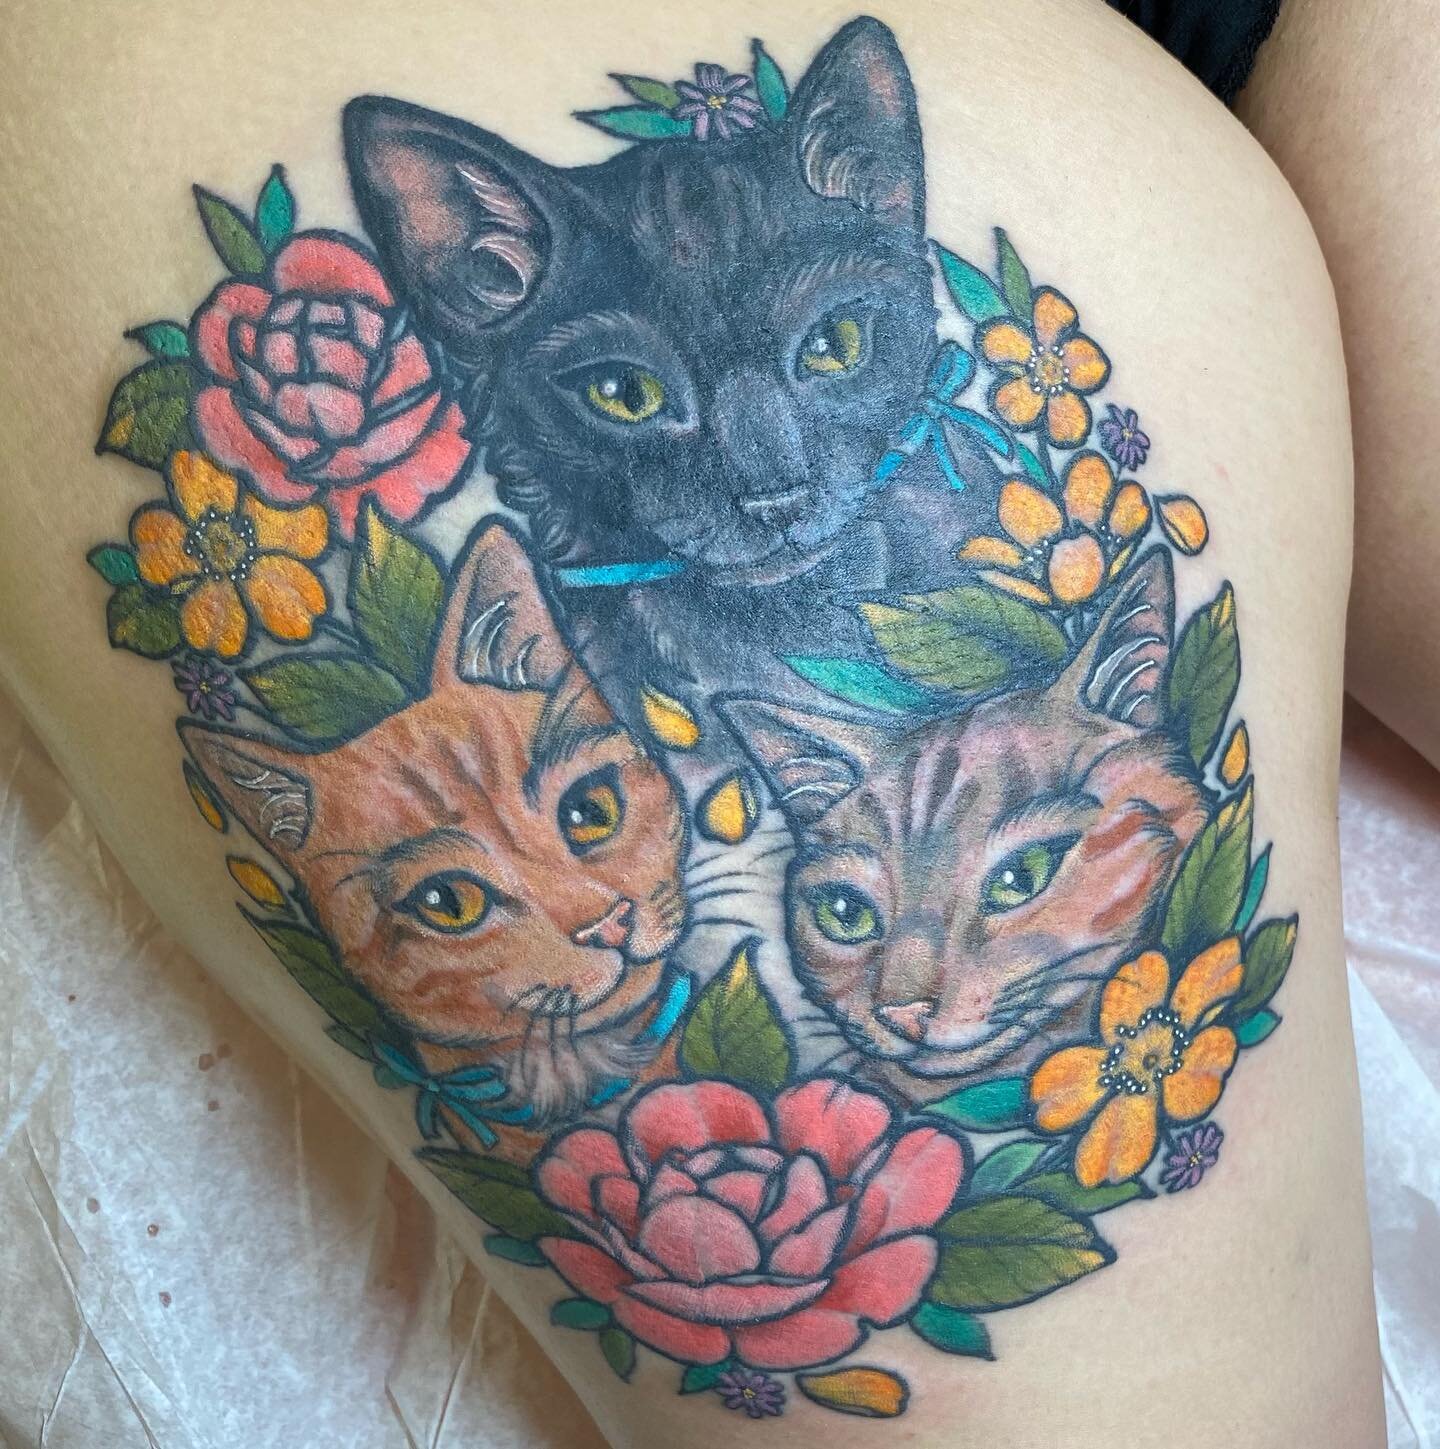 Kittens inspired by kittens... thanks Brianne! Lines and black are 3 years healed, color is fresh. Always happy to finish up a project 🐱 @whitedogtattooky 
(Swipe to see close ups of the kitties cause they&rsquo;re too cute!)